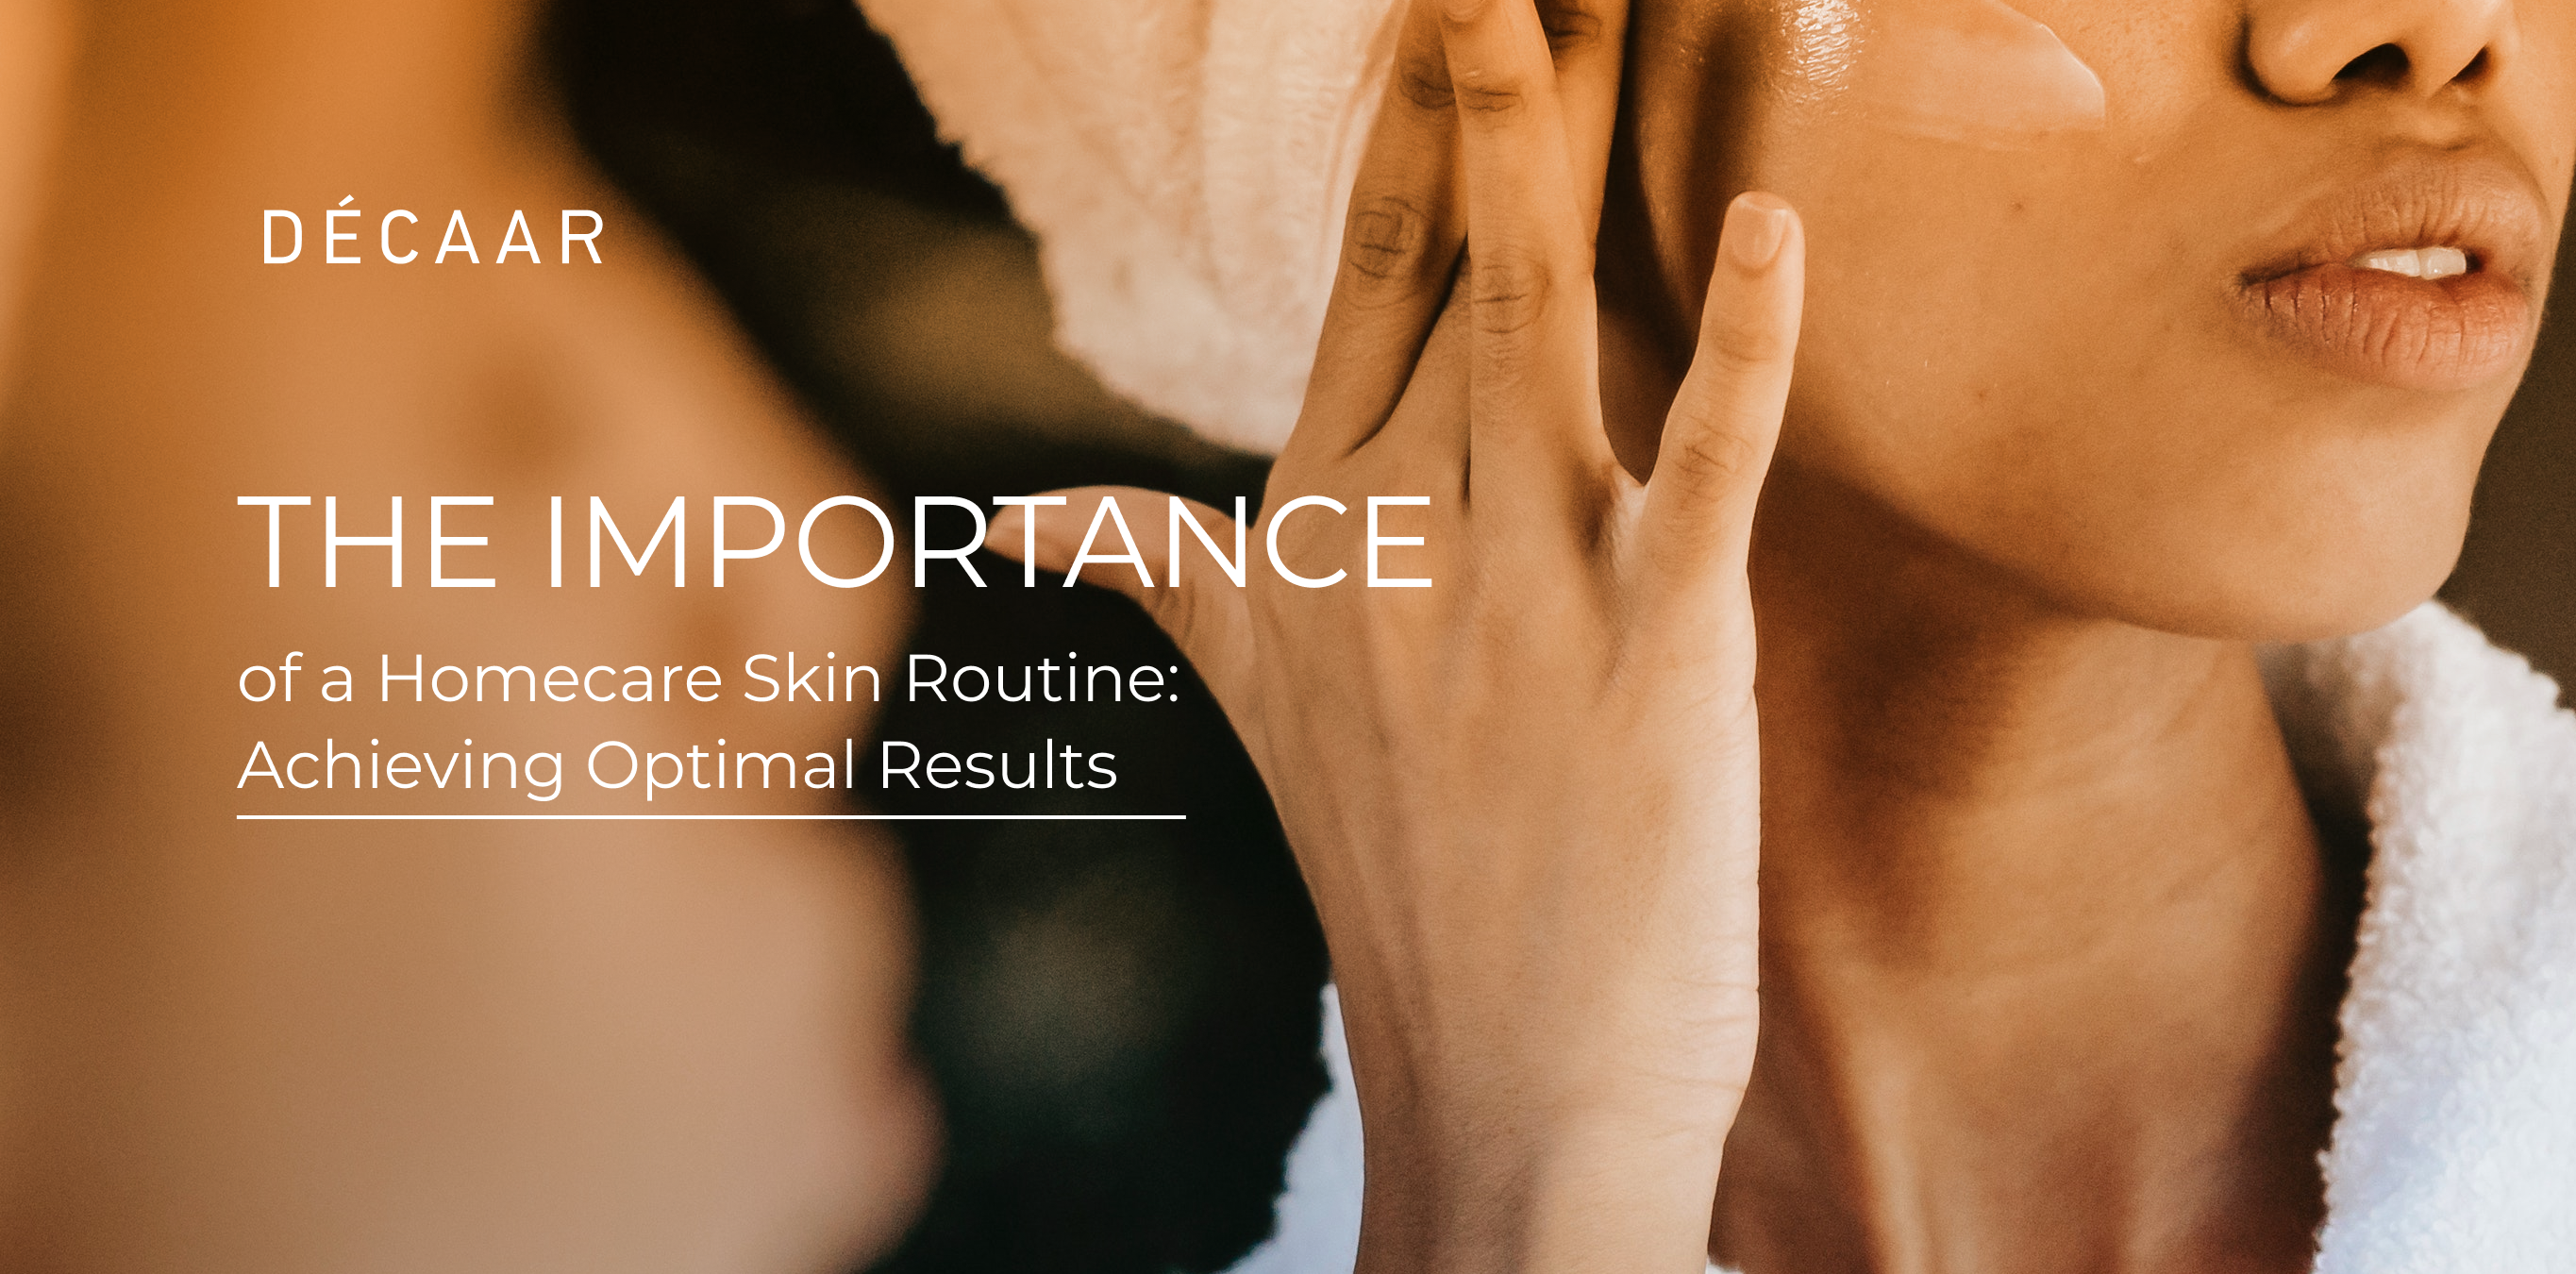 The Importance of a Homecare Skin Routine: Achieving Optimal Results